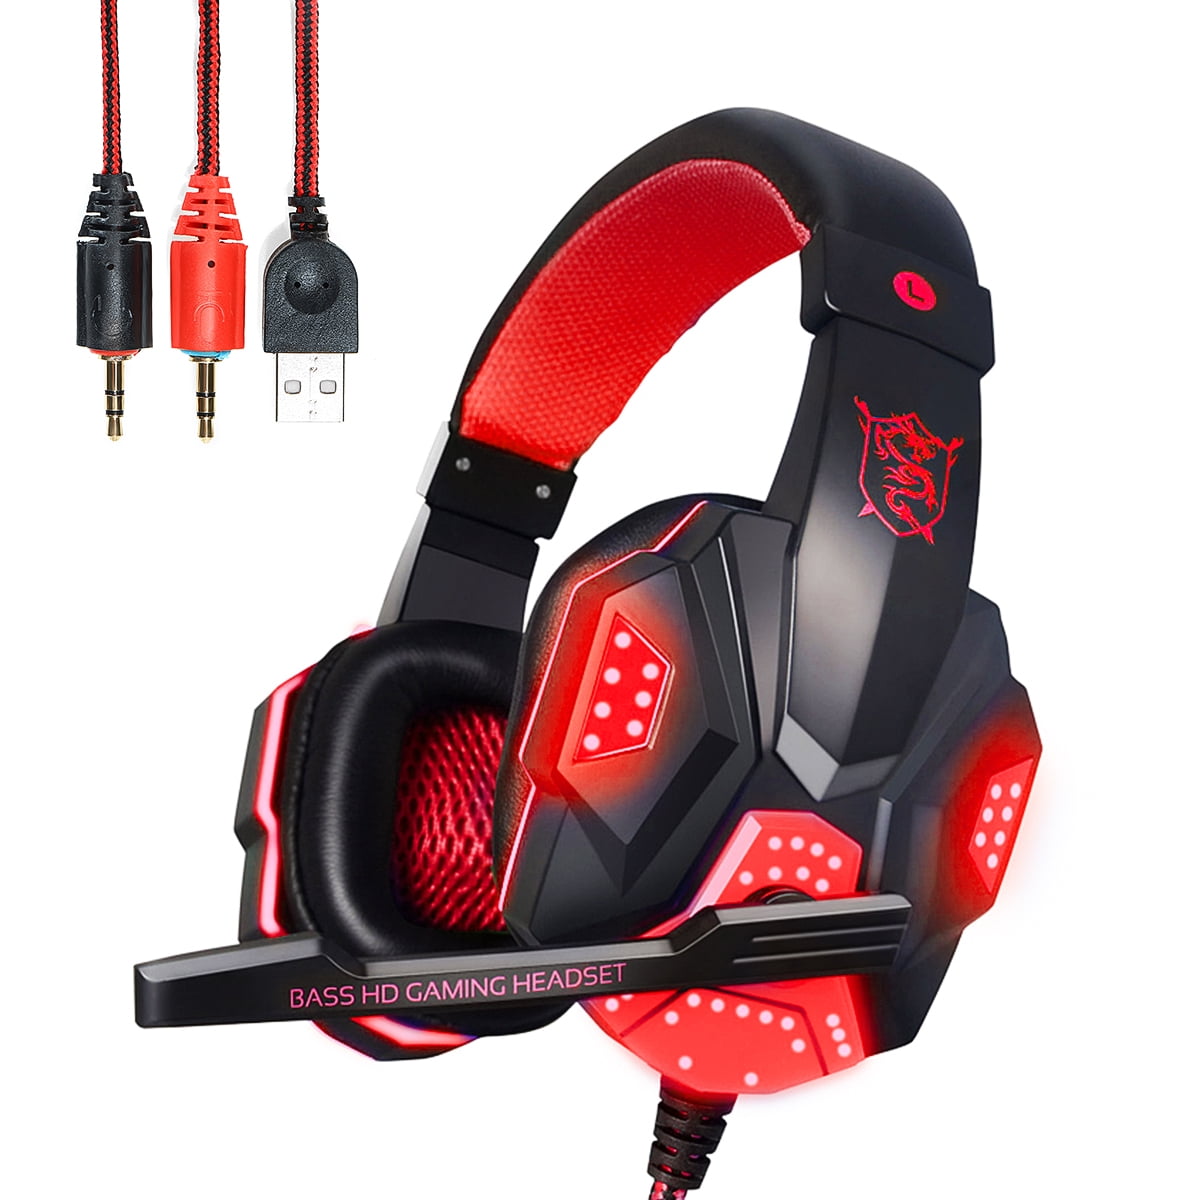 PLEXTONE PC Gaming Headset with Mic, Noise Reduction Retractable Wired Headphones with LED Lights, Stereo Bass Surround Over-Ear Earphones Earmuffs